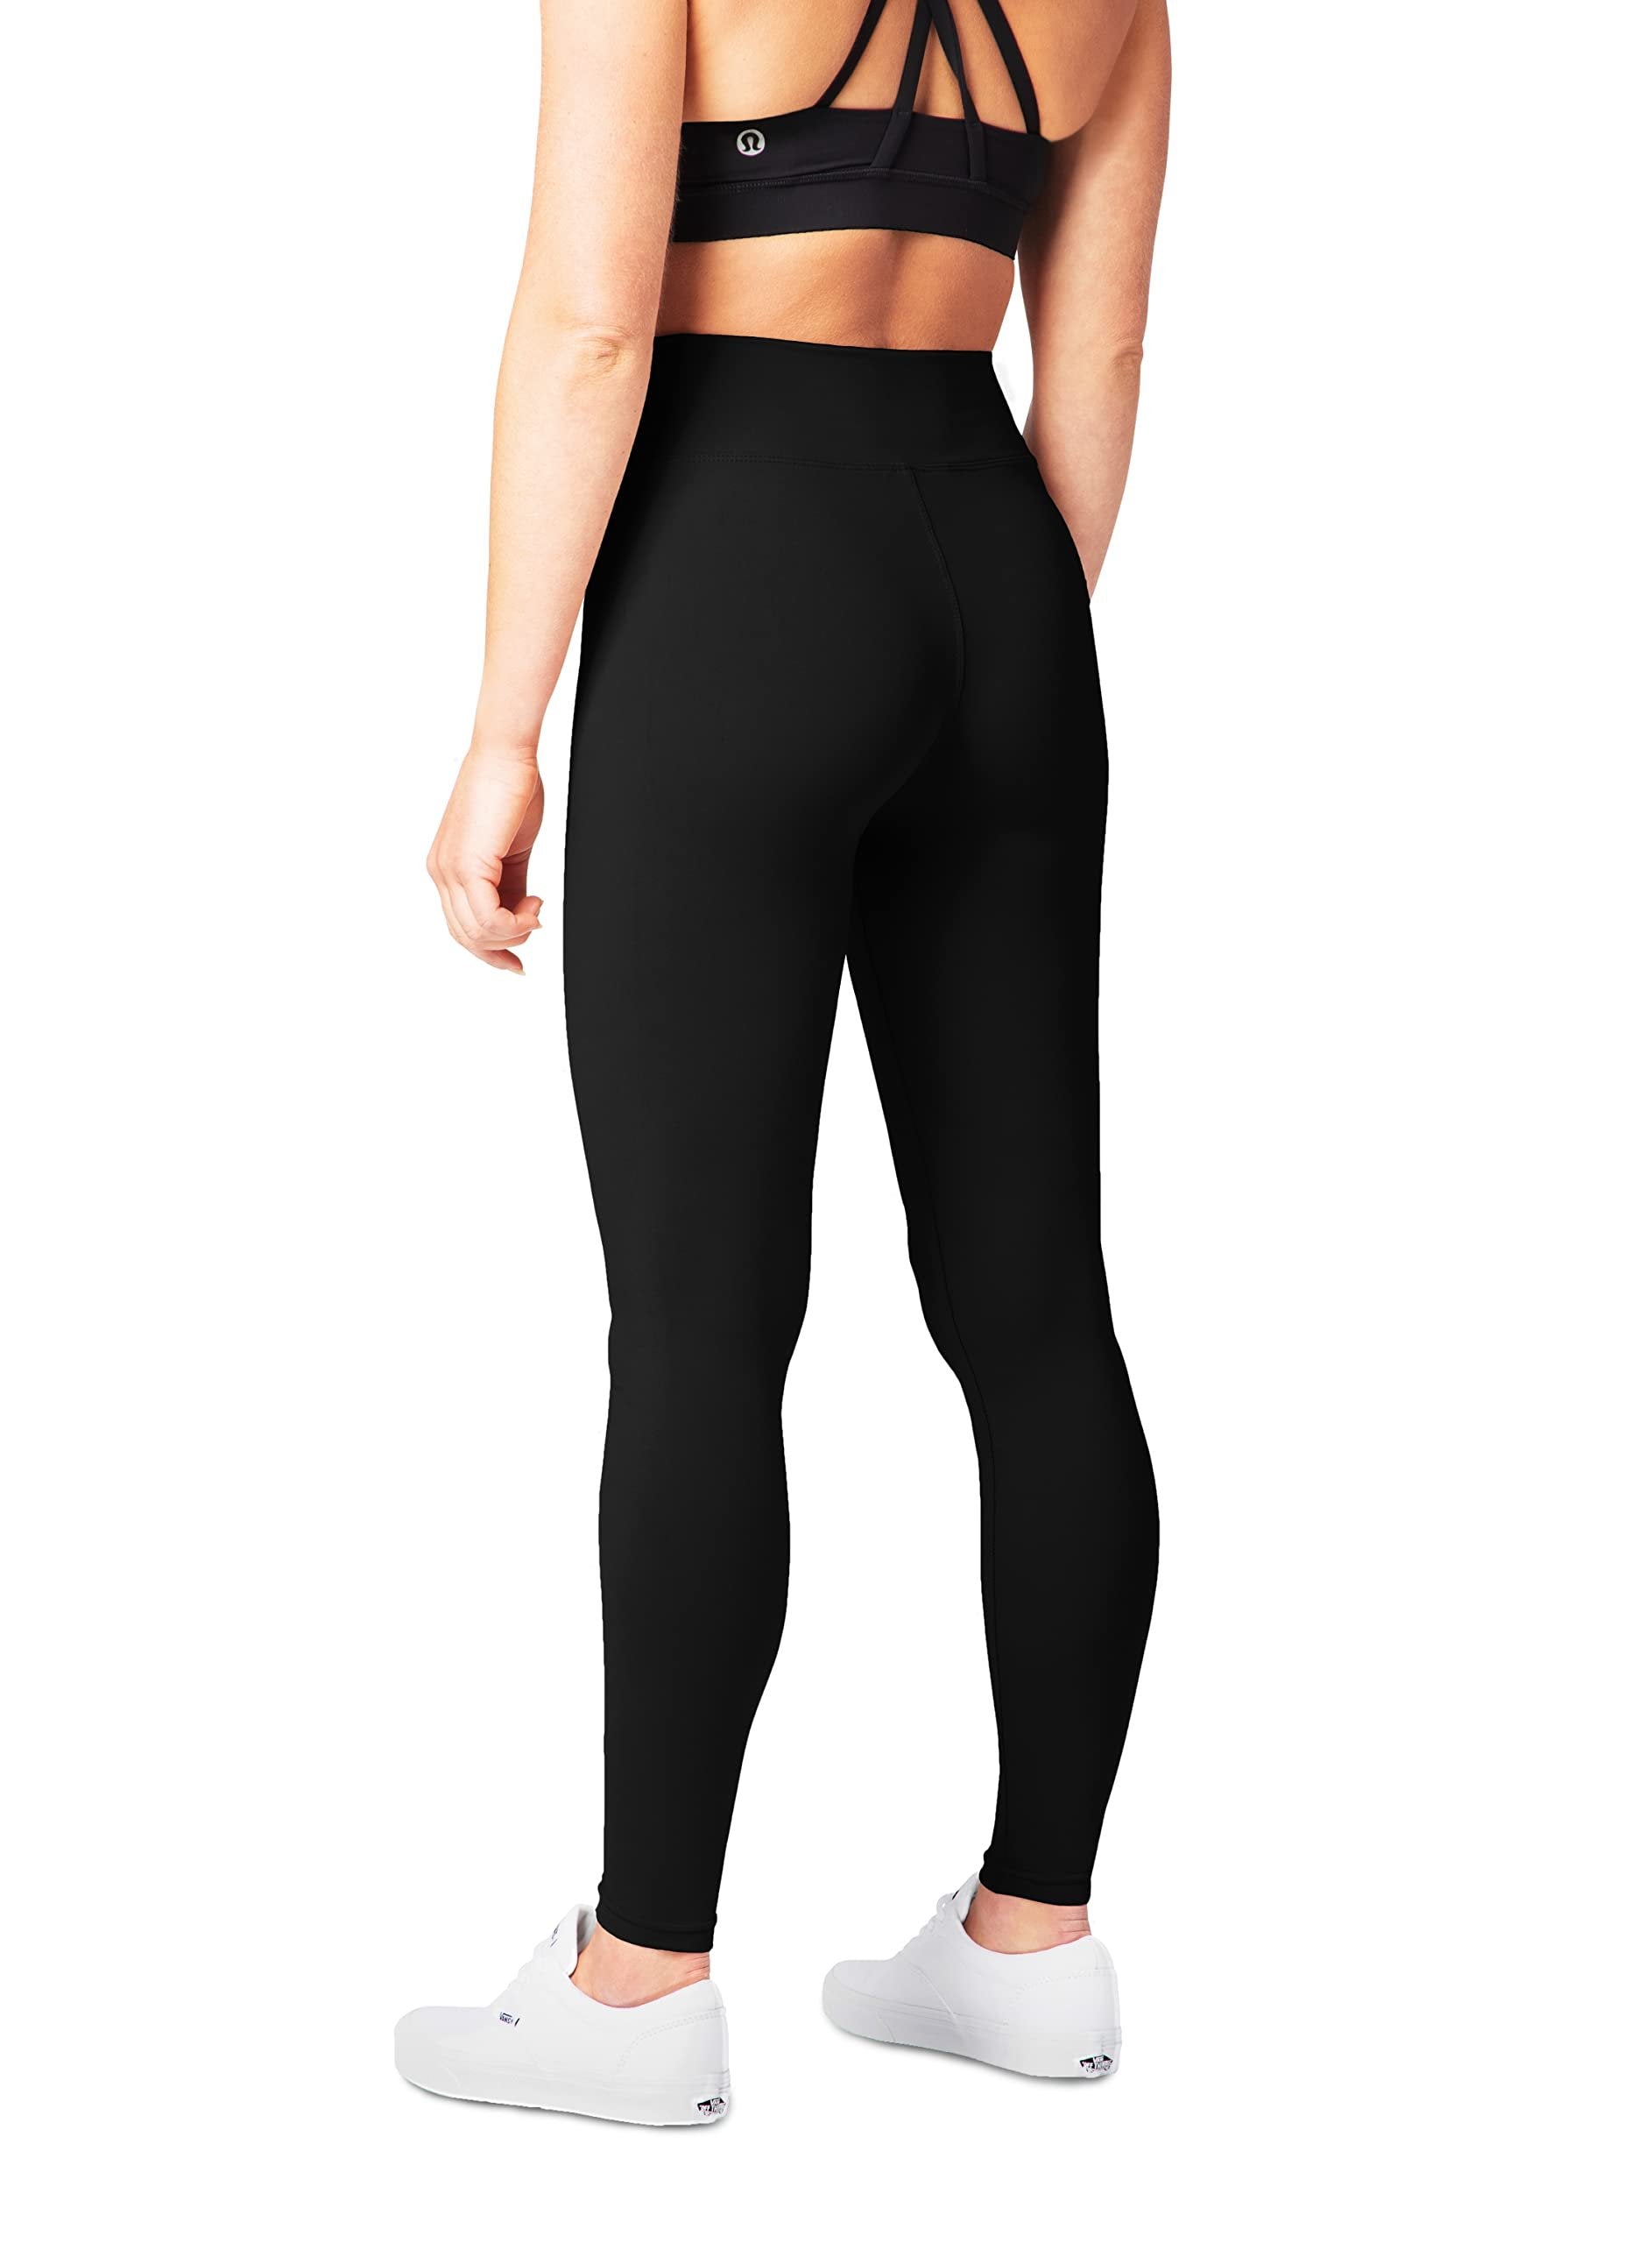 New SATINA Black High Waisted Yoga Leggings, One Size Fits All, 3 Inch Waistband"